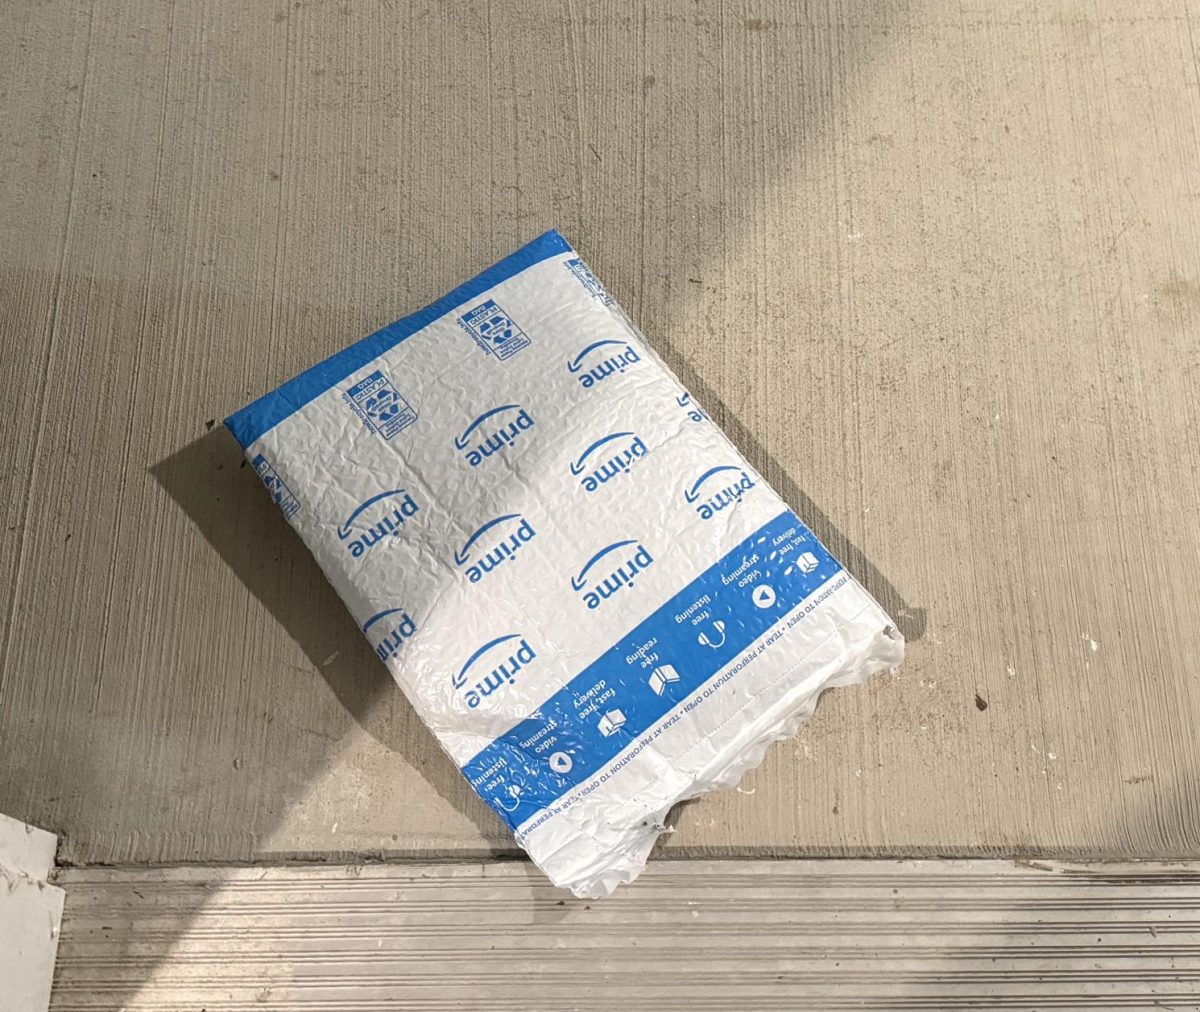 A resident received an Amazon package outside their door.